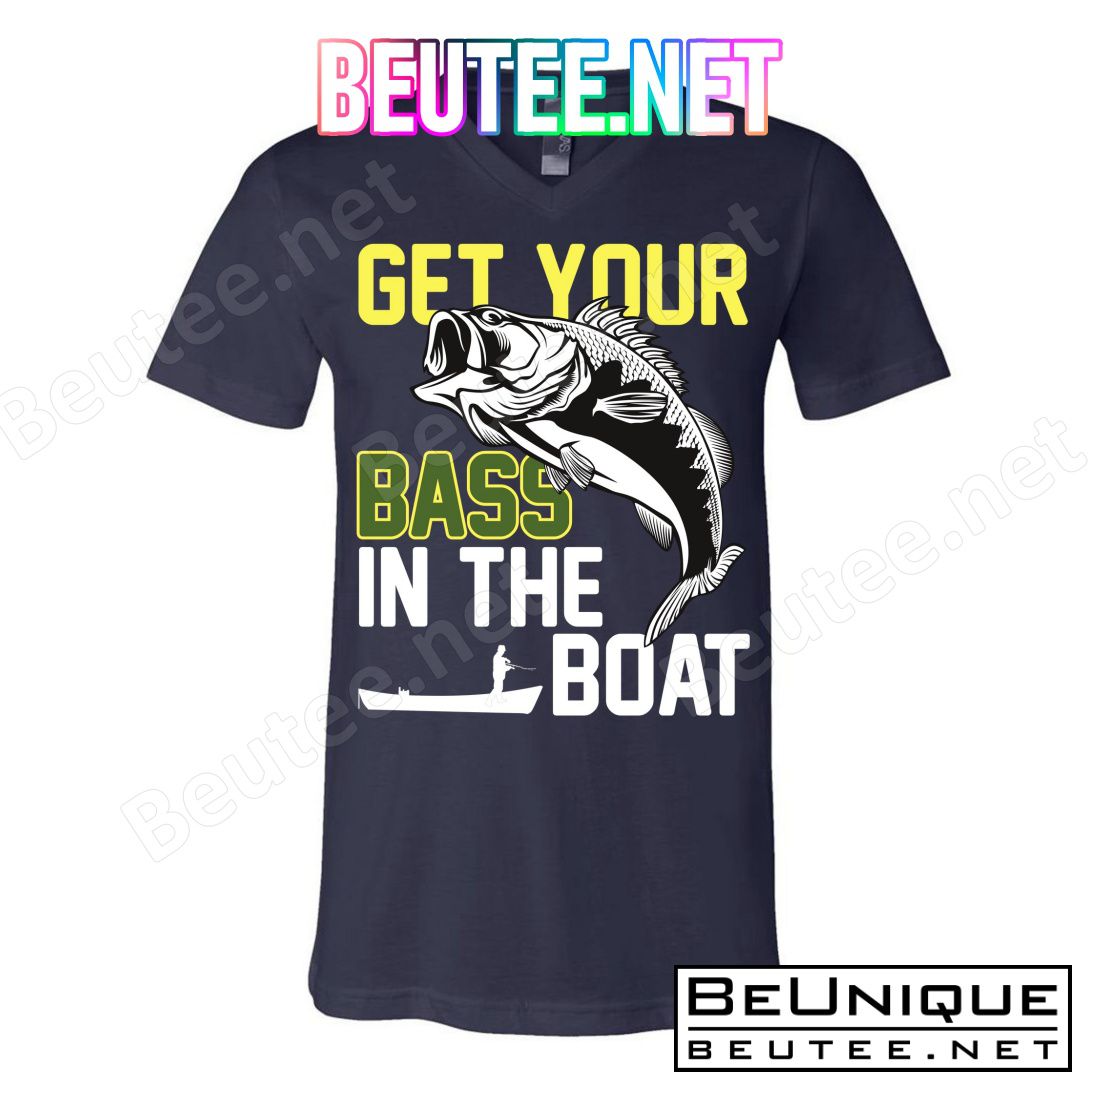 Get Your Bass In The Boat T-Shirts